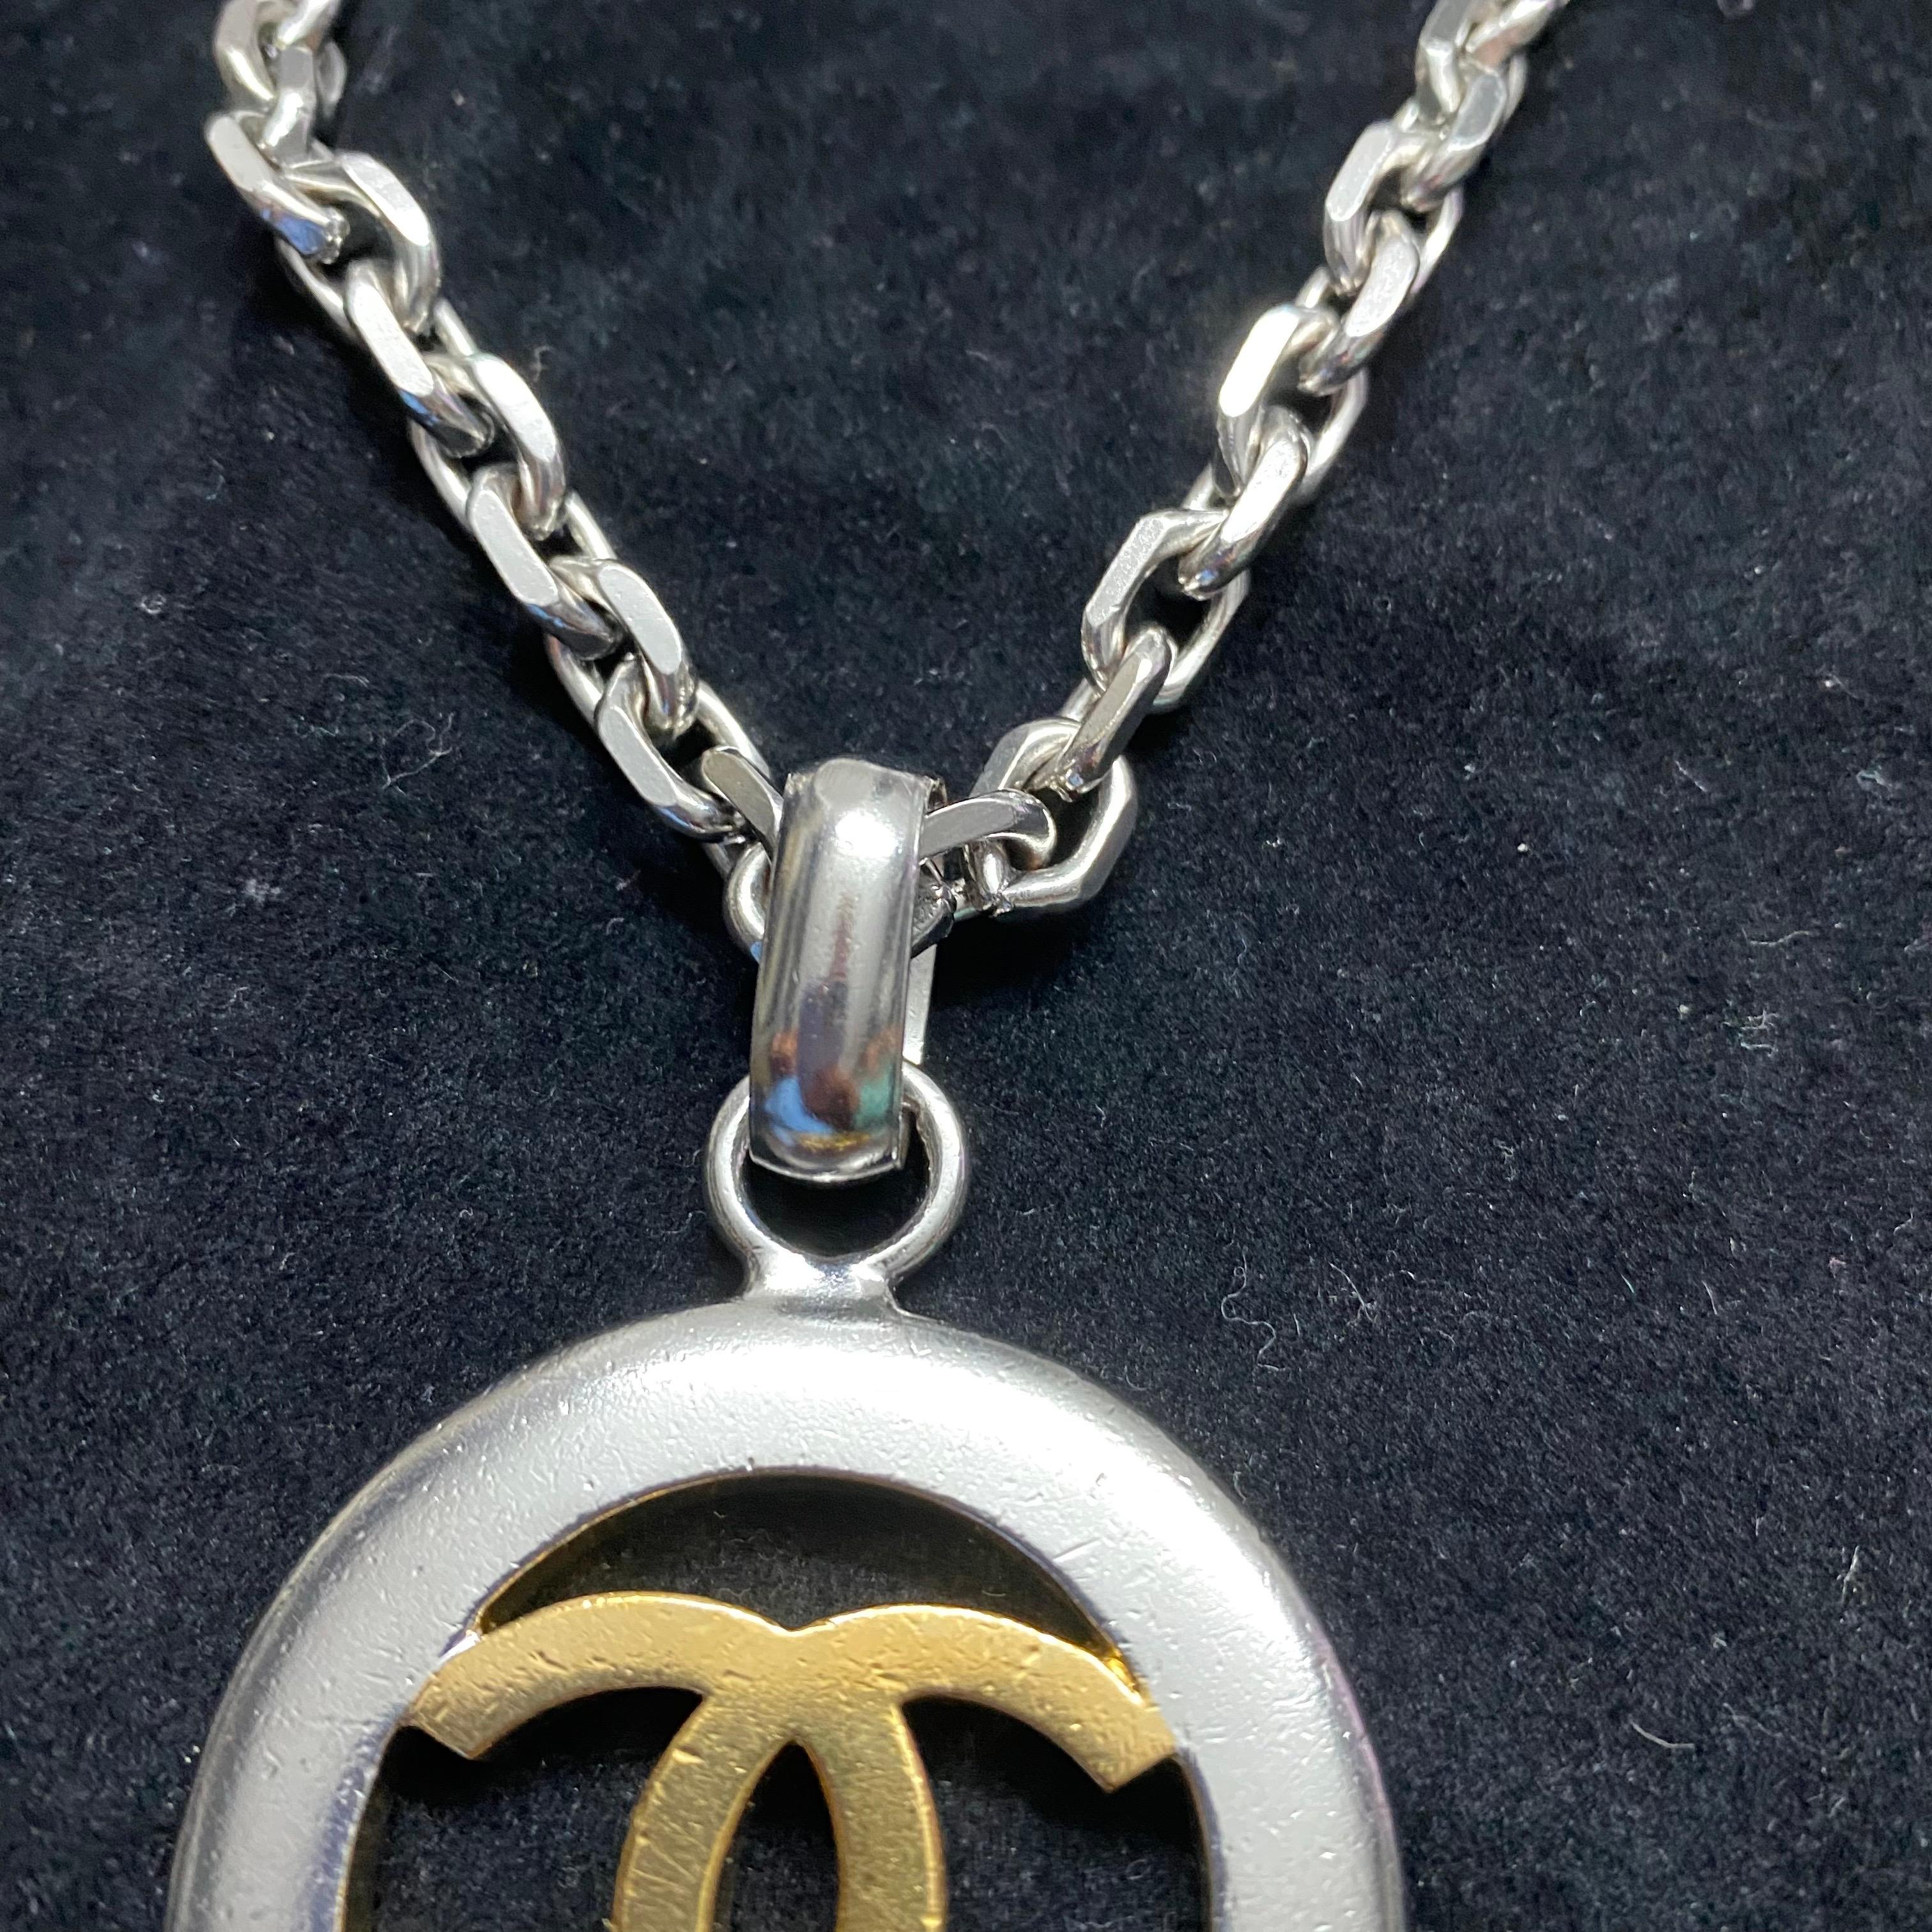 Art Deco Chanel Vintage -  Necklace with CC pendant in Gold and Silver coated Metal